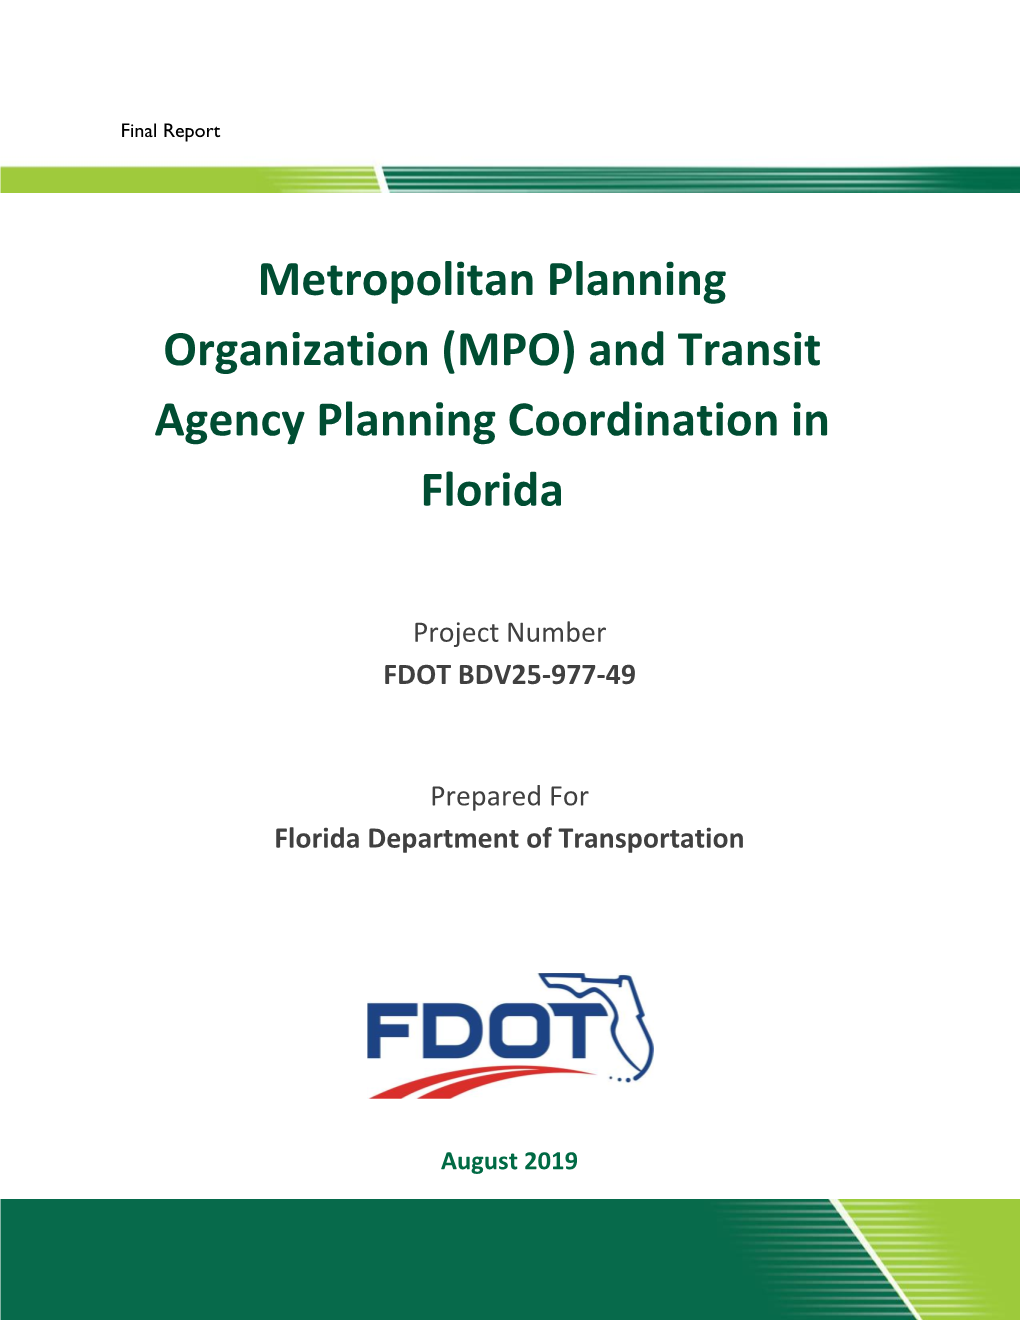 (MPO) and Transit Agency Planning Coordination in Florida